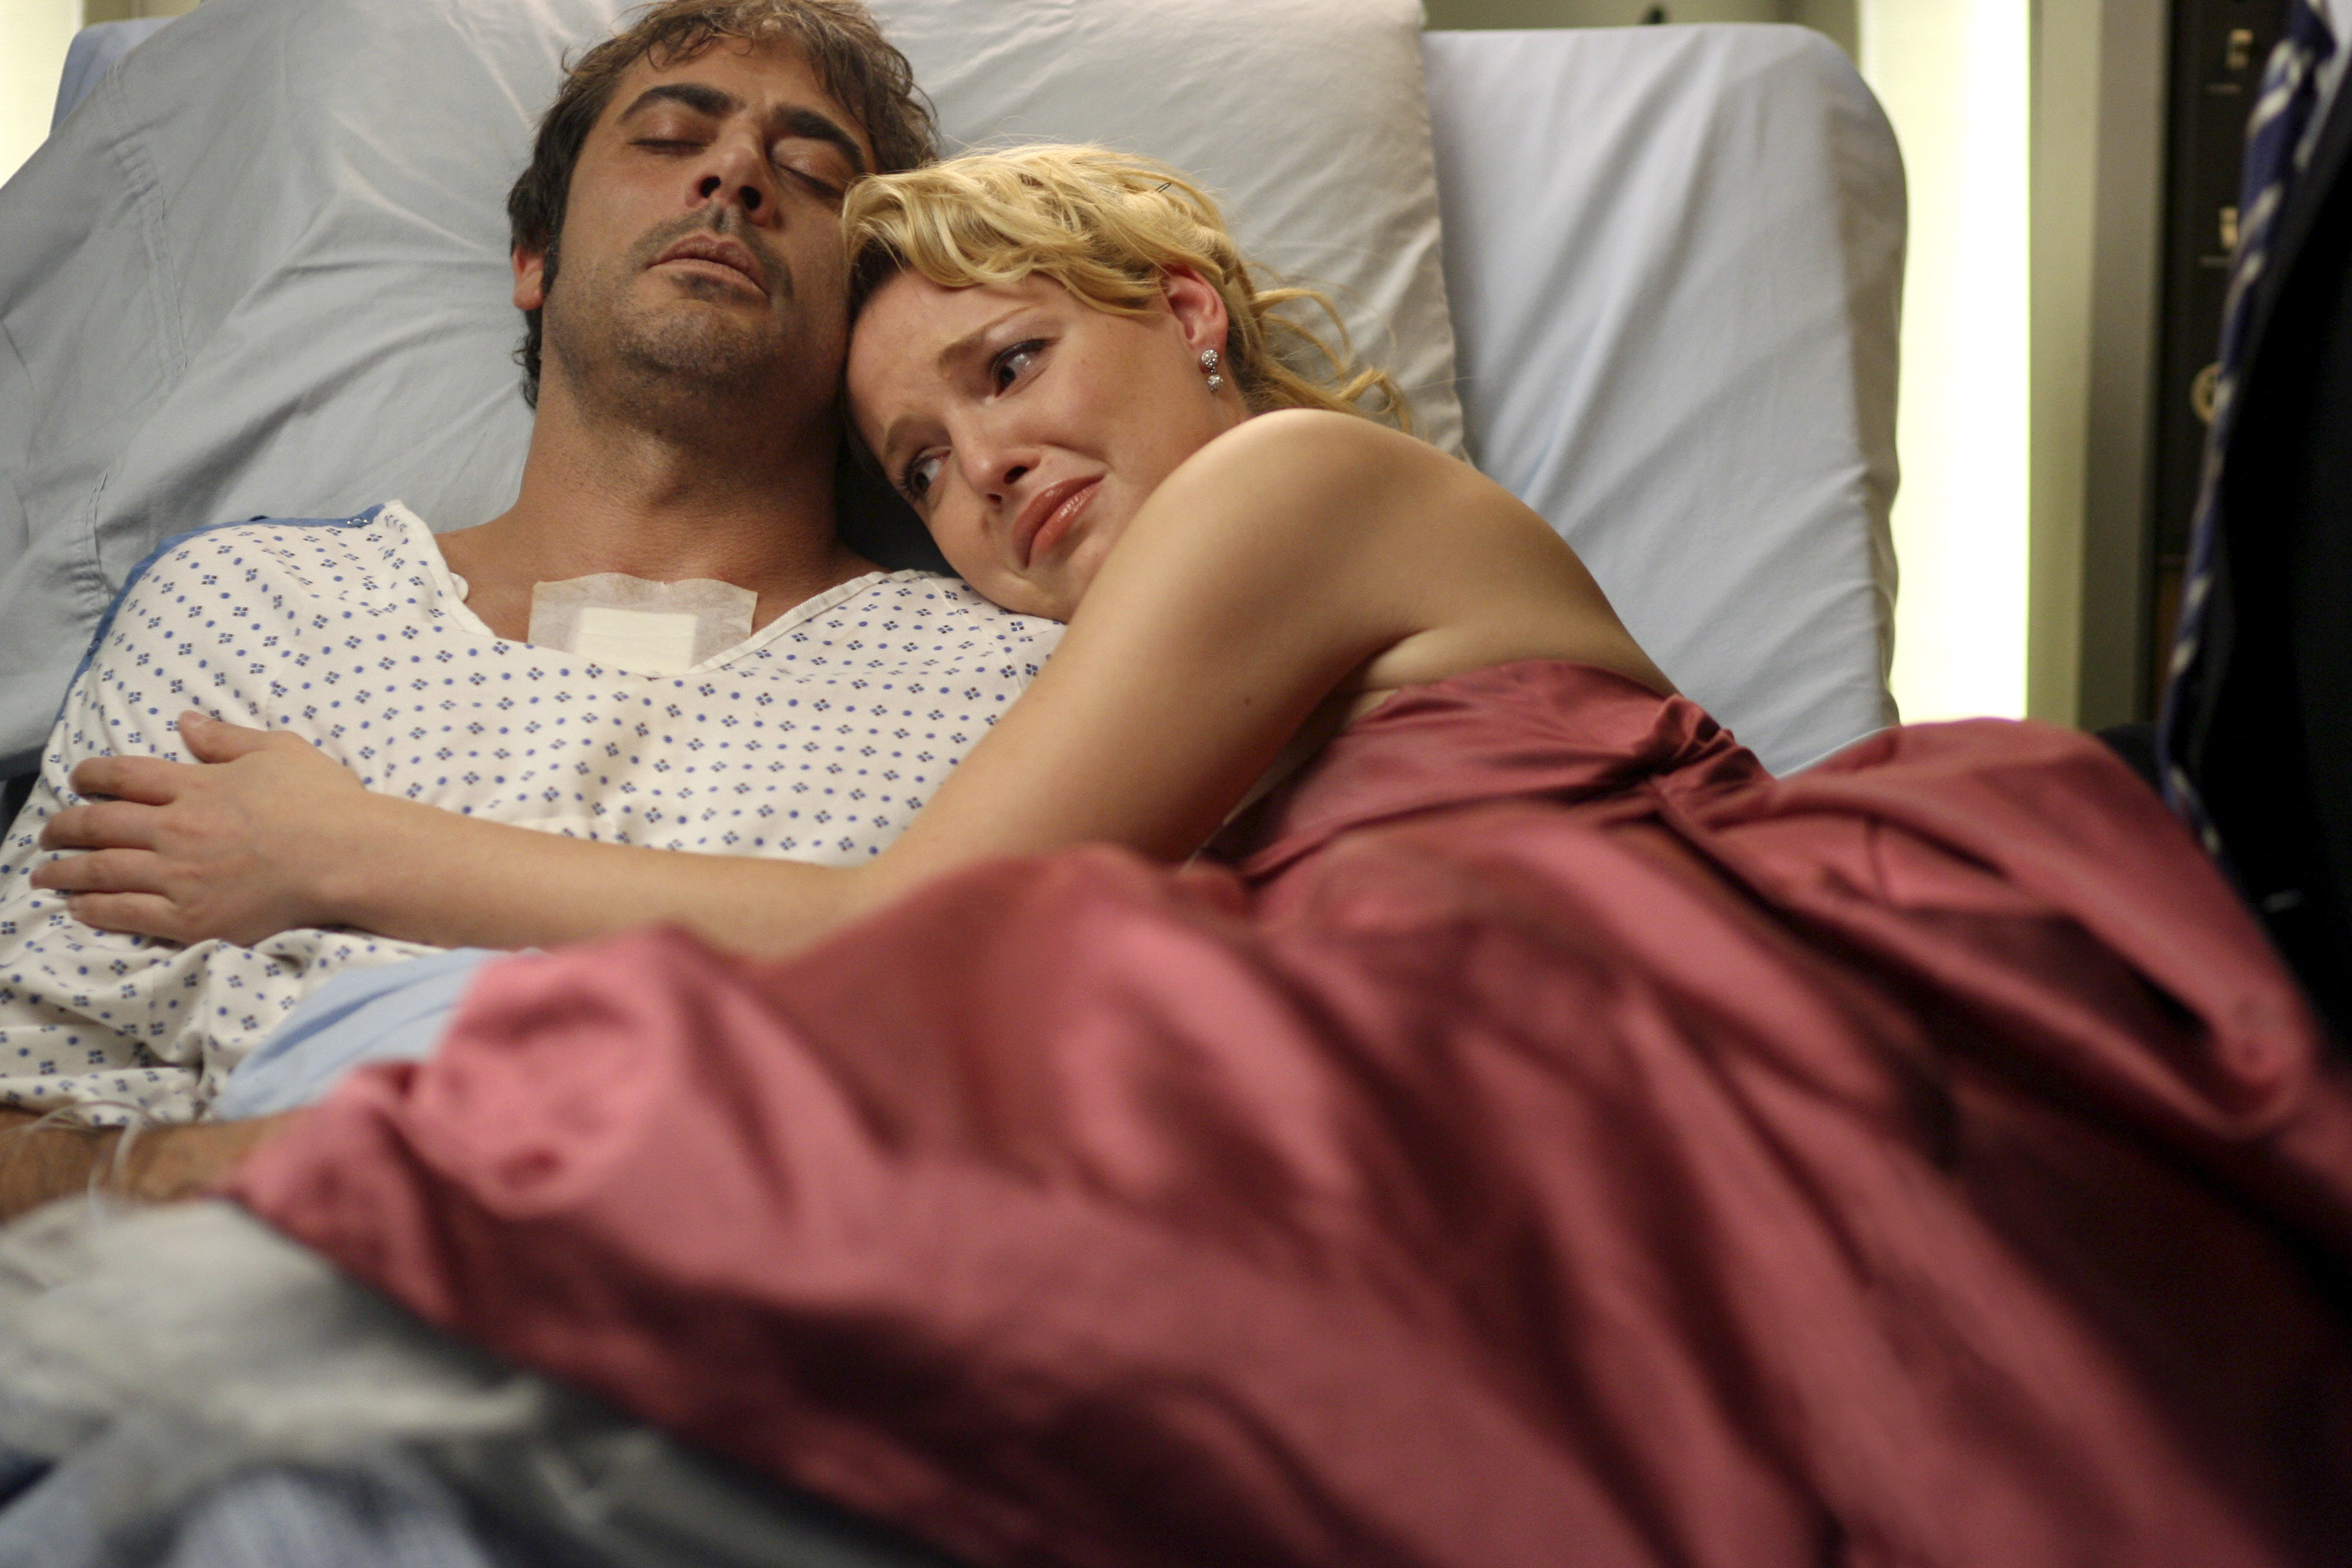 Izzie tearfully snuggles up to Jeffrey Dean Morgan as Denny Duquette, who is in a hospital bed